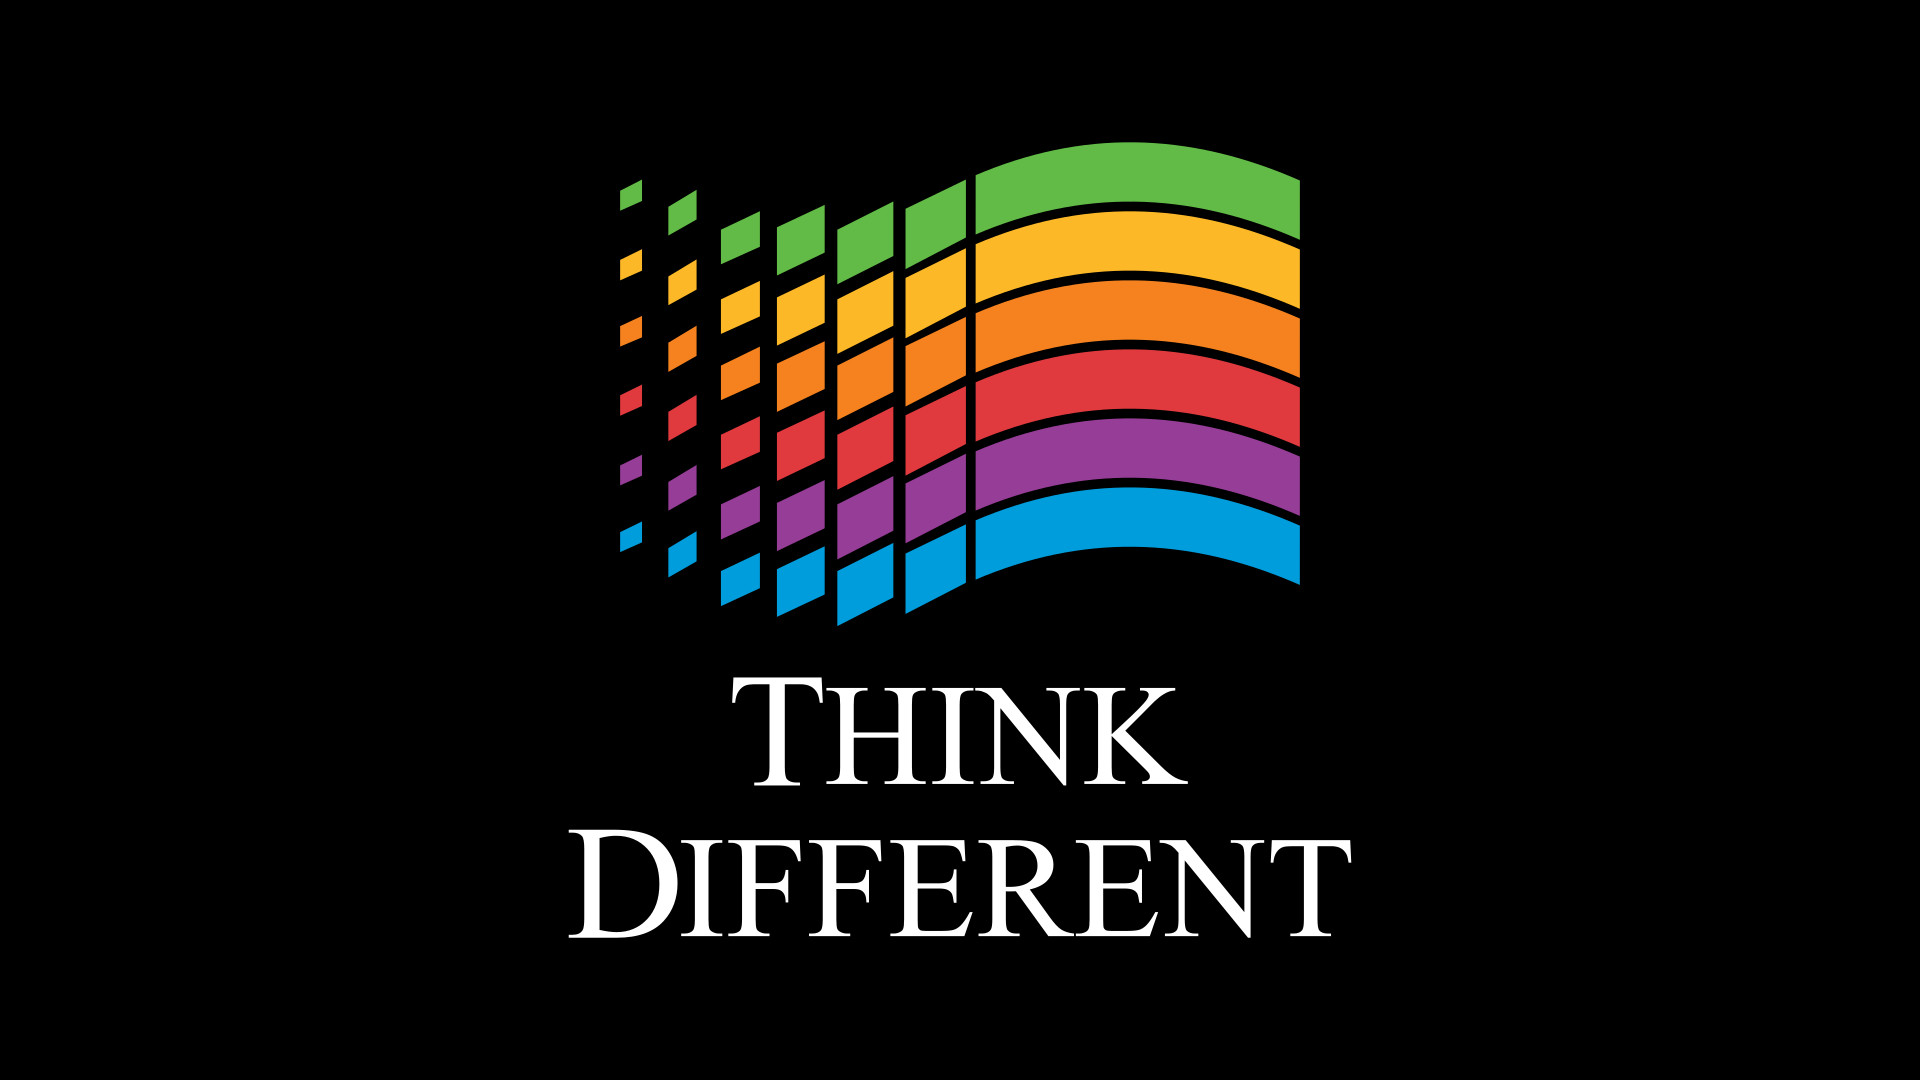 1920x1080, Think Different, In The Style Of Microsoft - Windows 3.1 - HD Wallpaper 